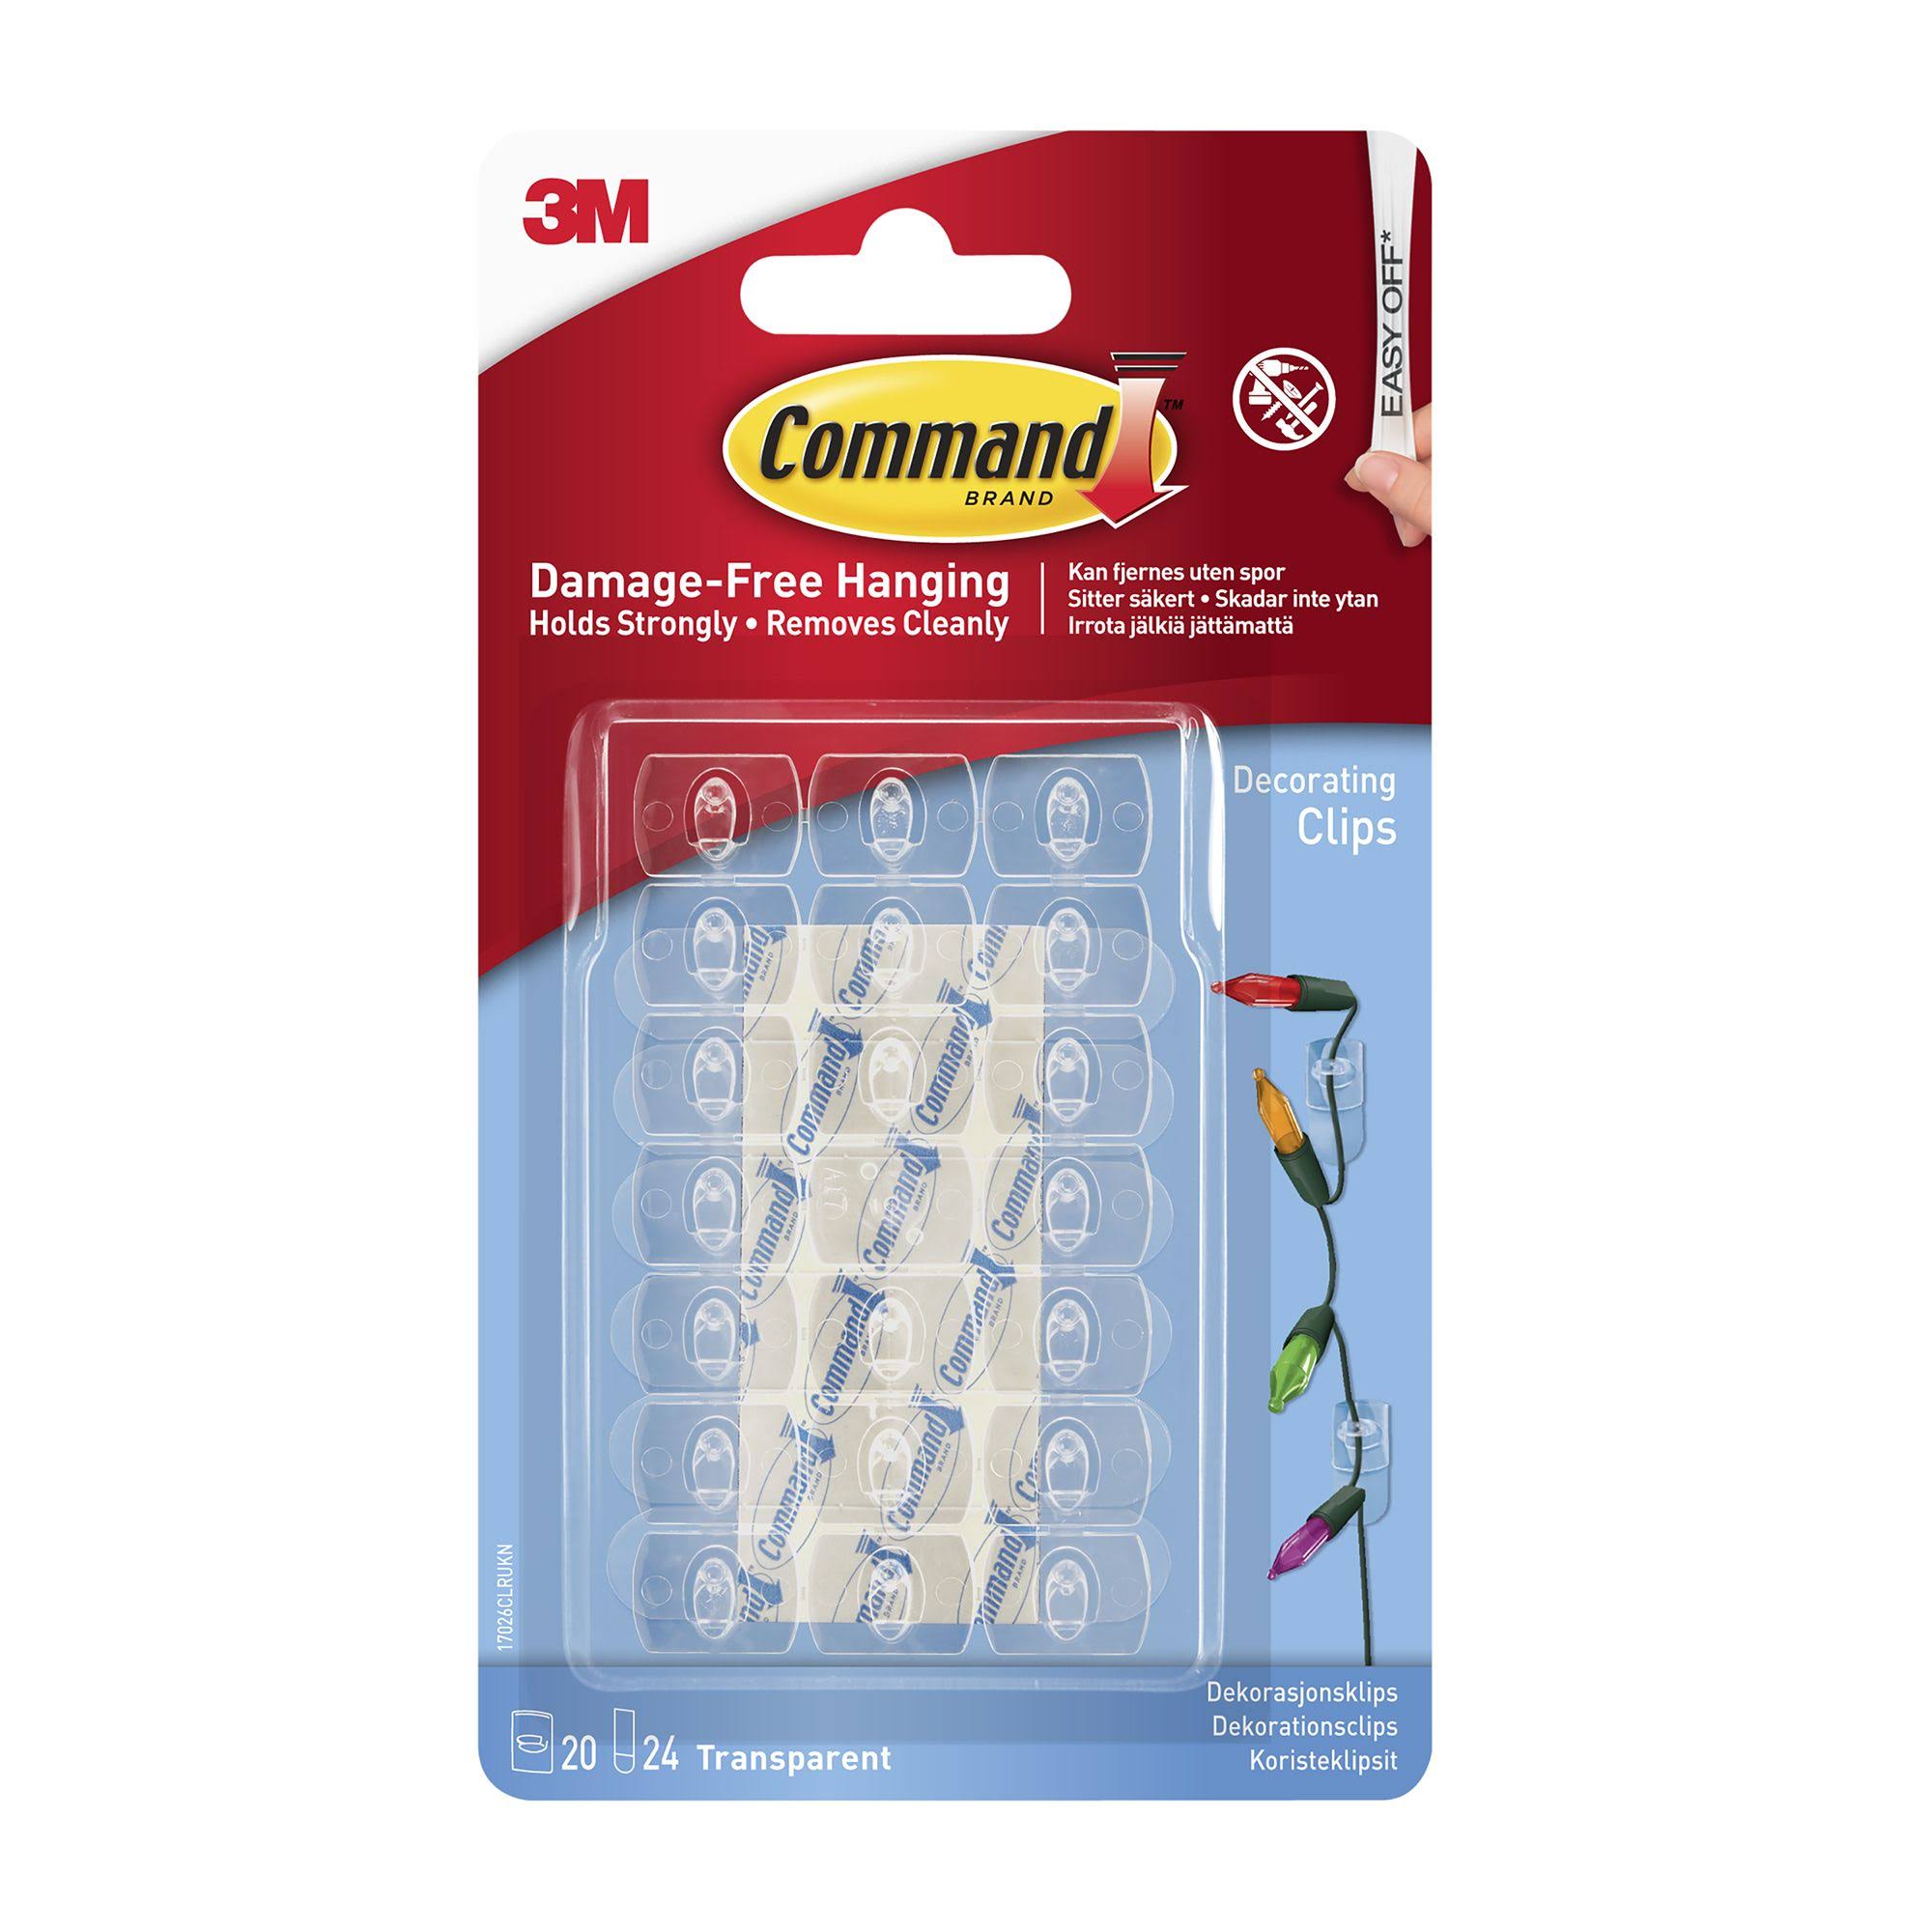 Command Decorating Clips - Clear, 20 Clips, 24 Mini Strips